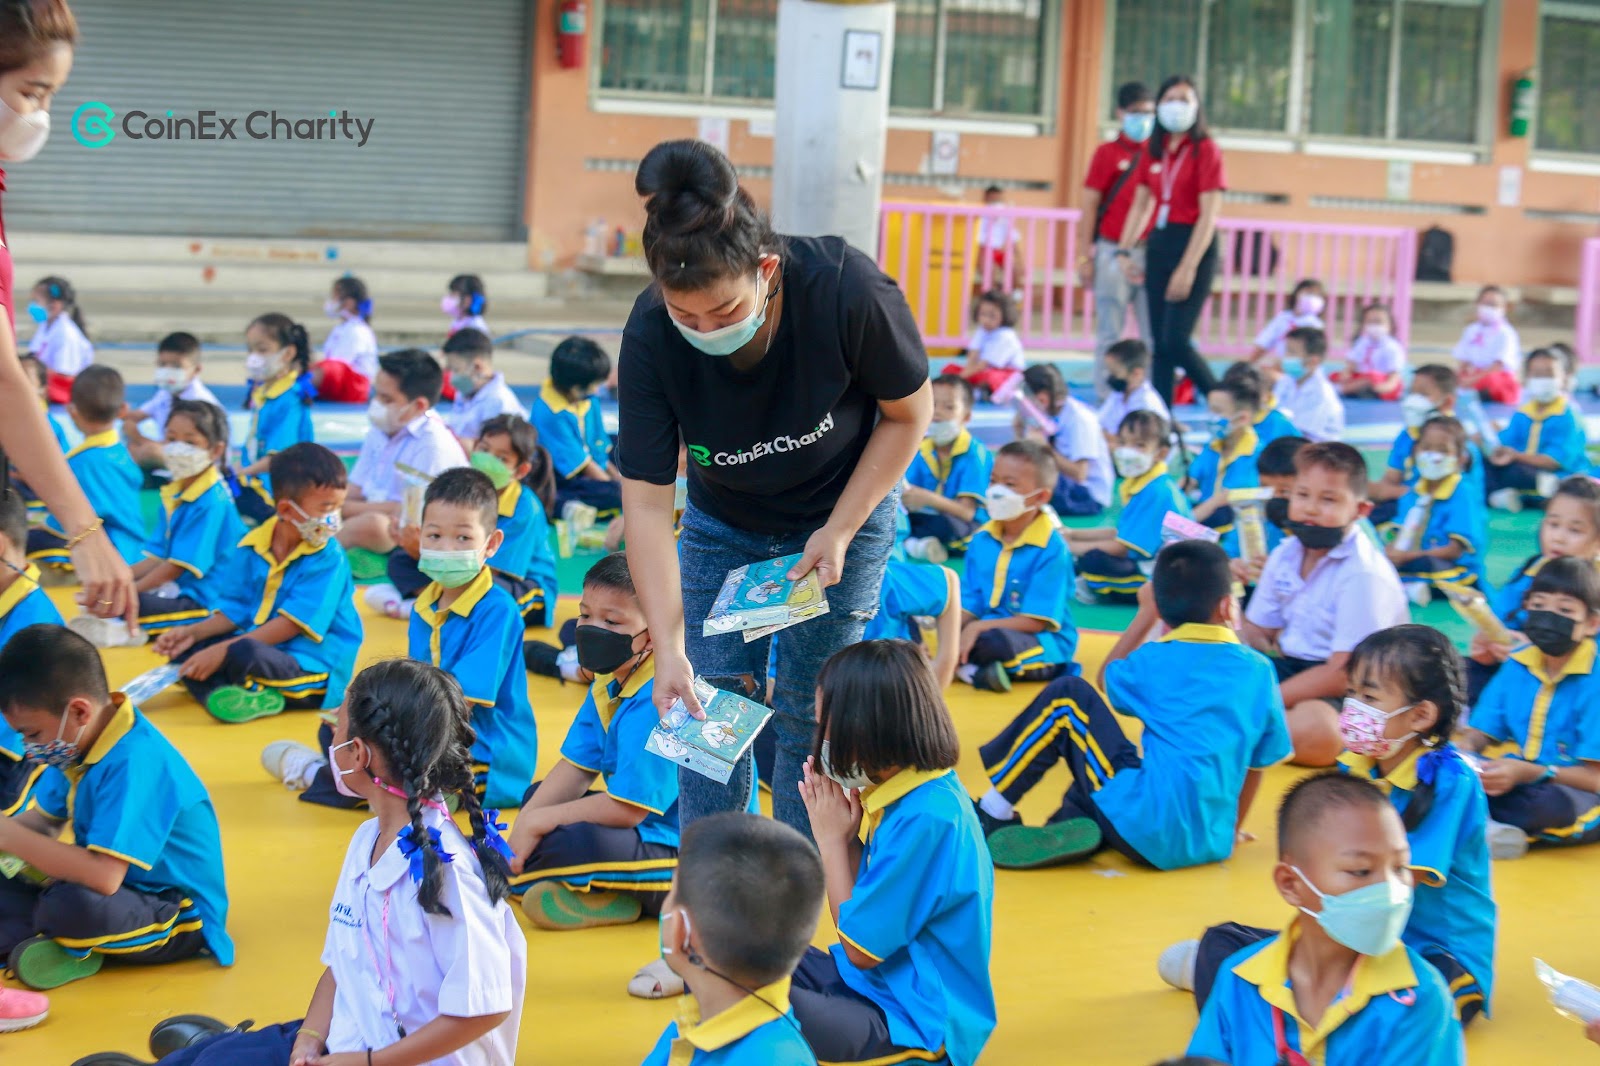 CoinEx Charity “Over 10,000 Books for Children’s Dreams” Thailand